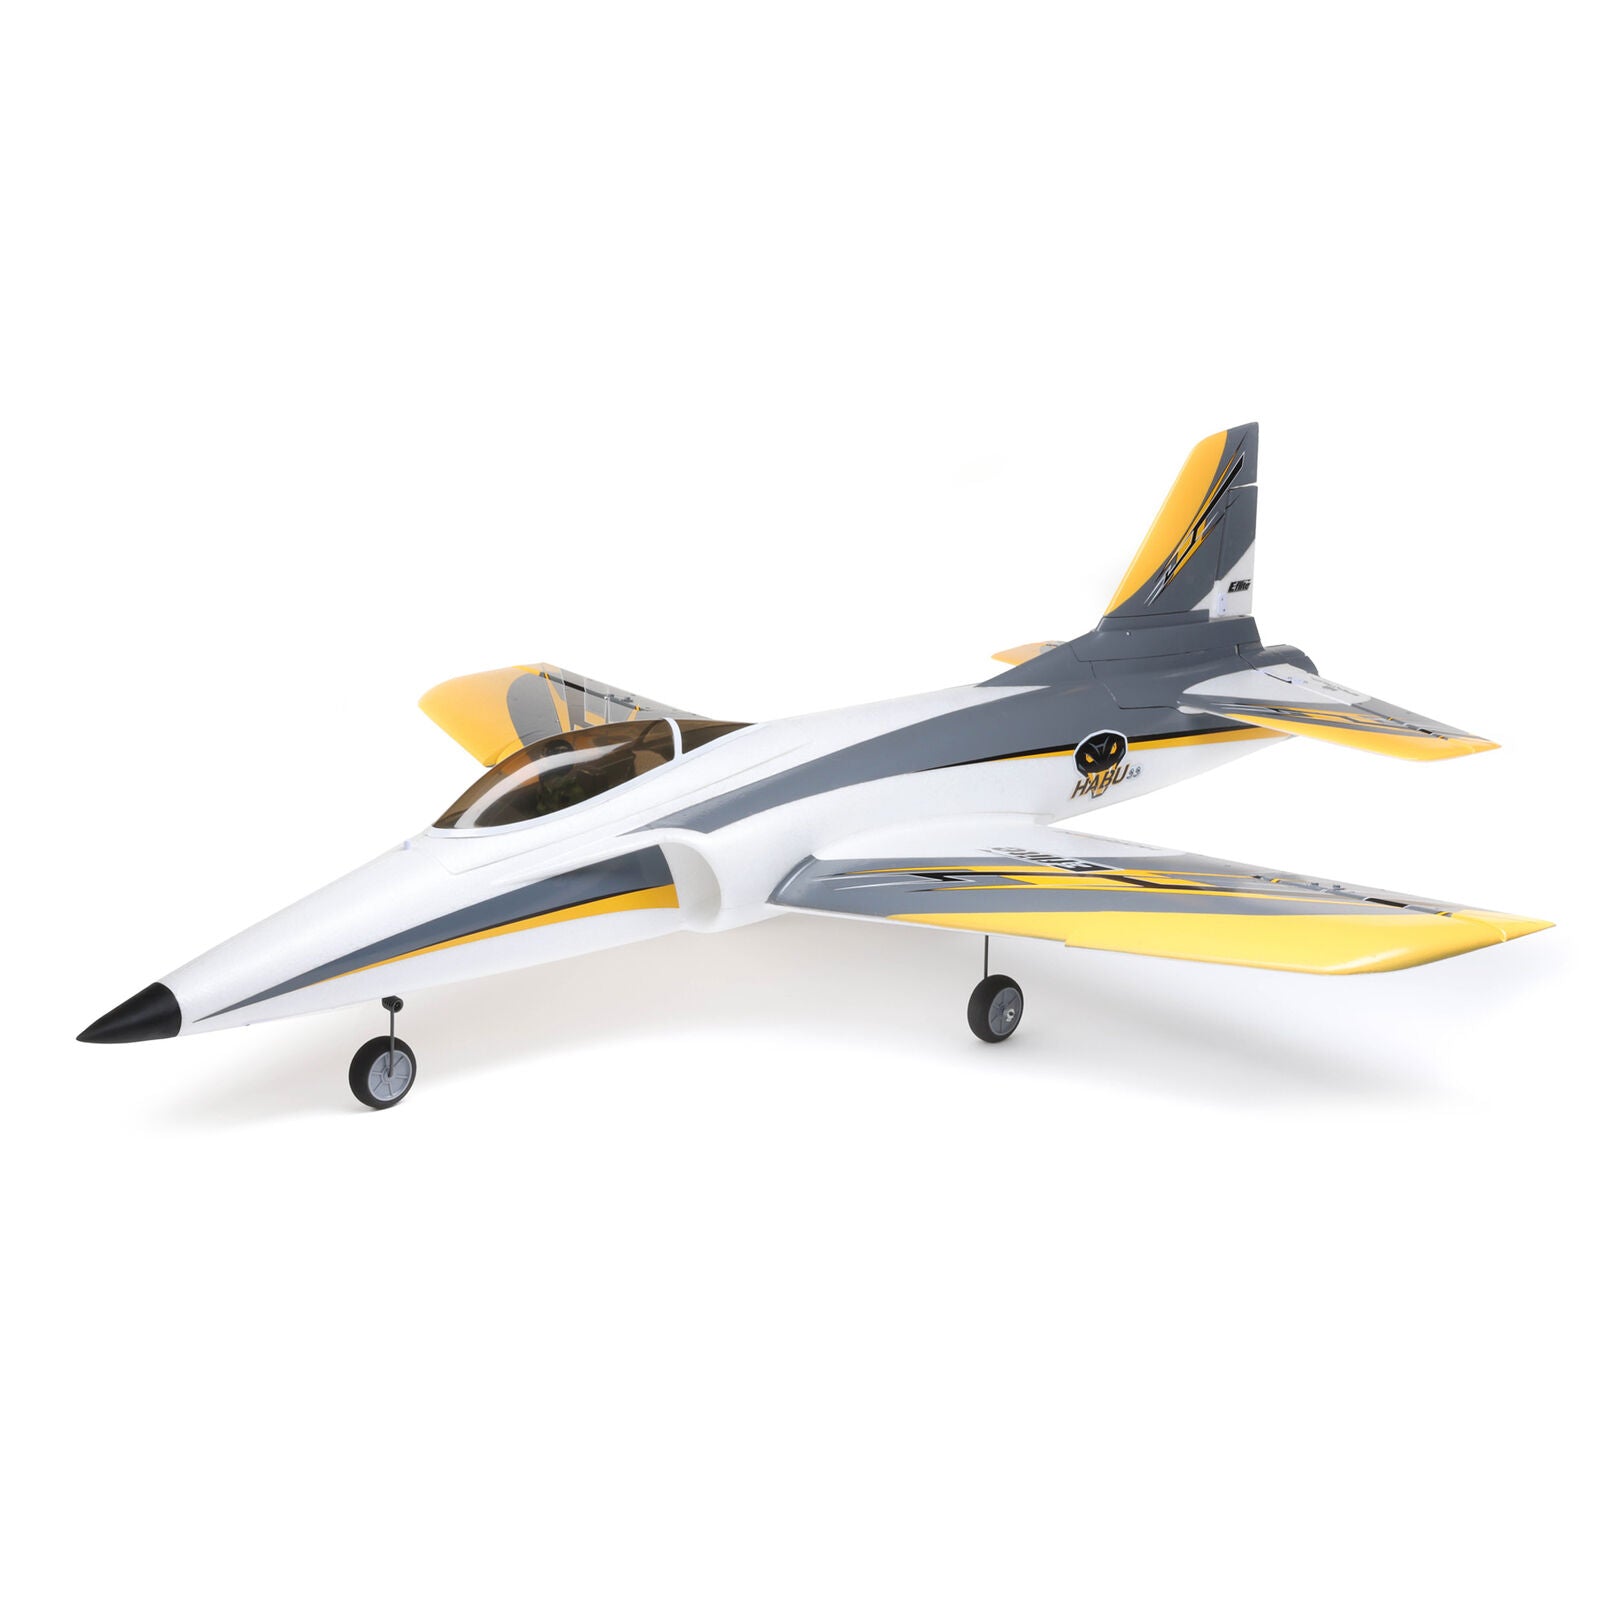 EFLITE EFL0950 Habu SS (Super Sport) 70mm EDF Jet BNF Basic with SAFE Select and AS3X